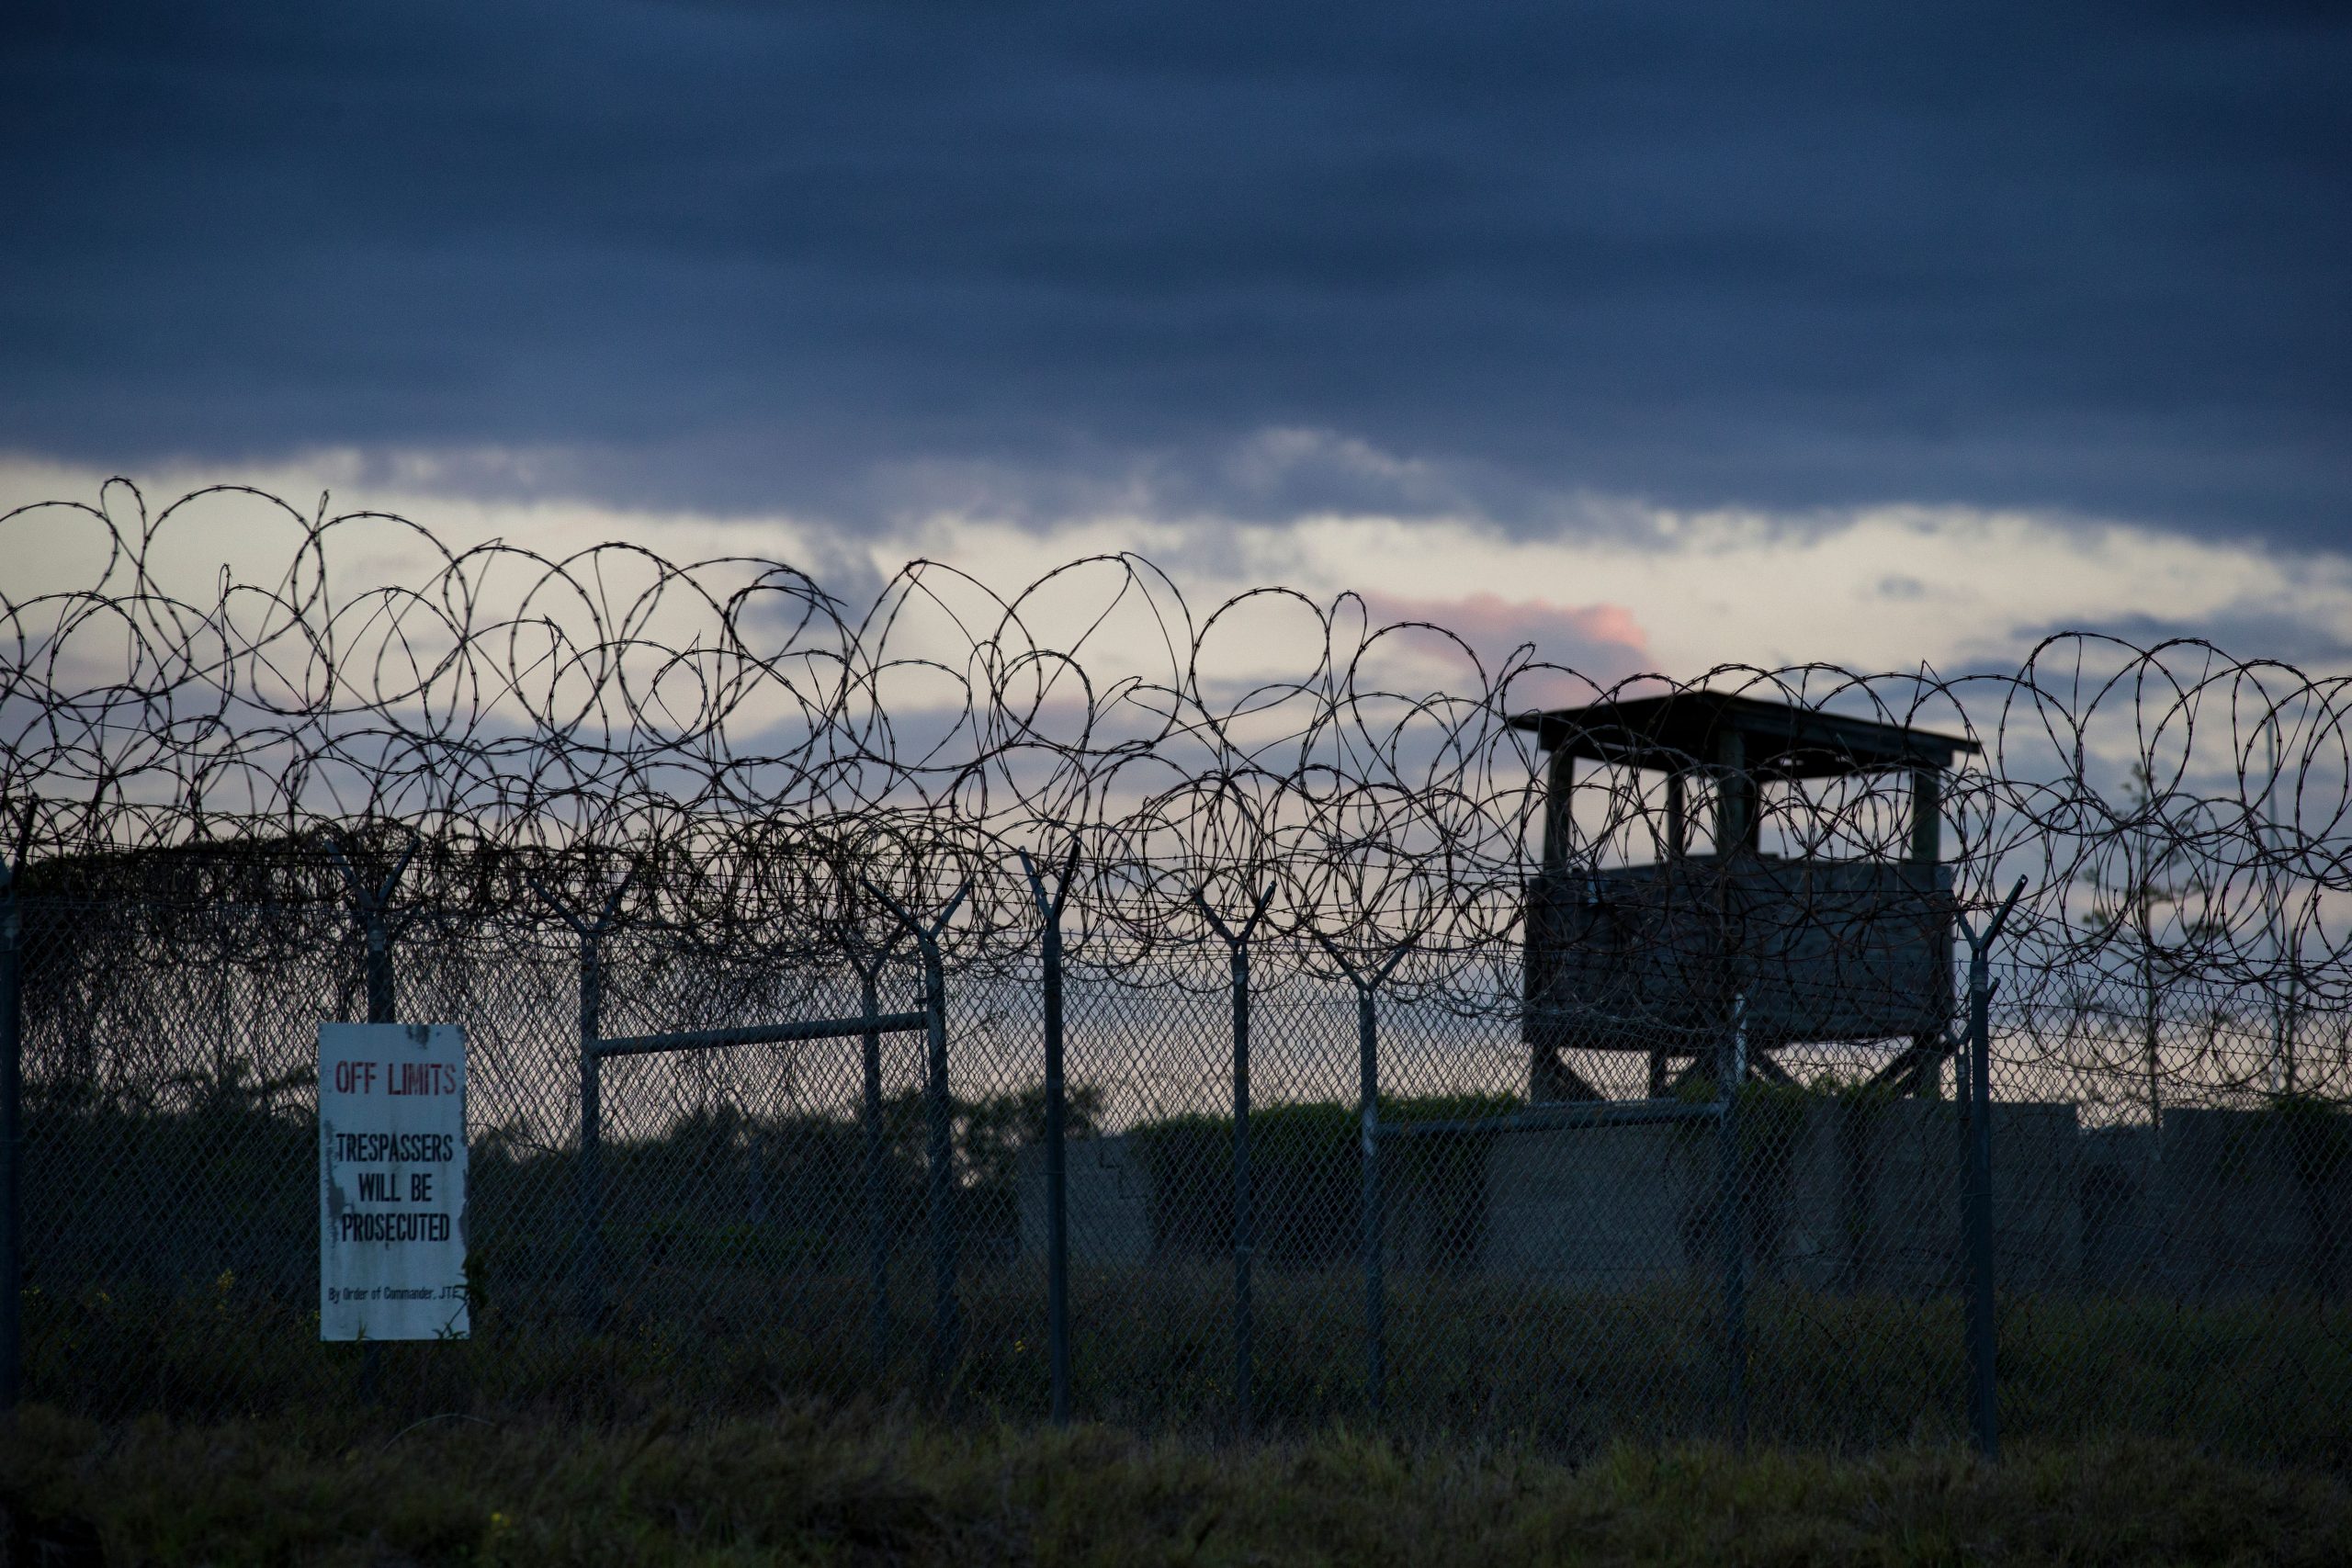 Explained: How half of Guantanamo Bay’s prisoners could be released